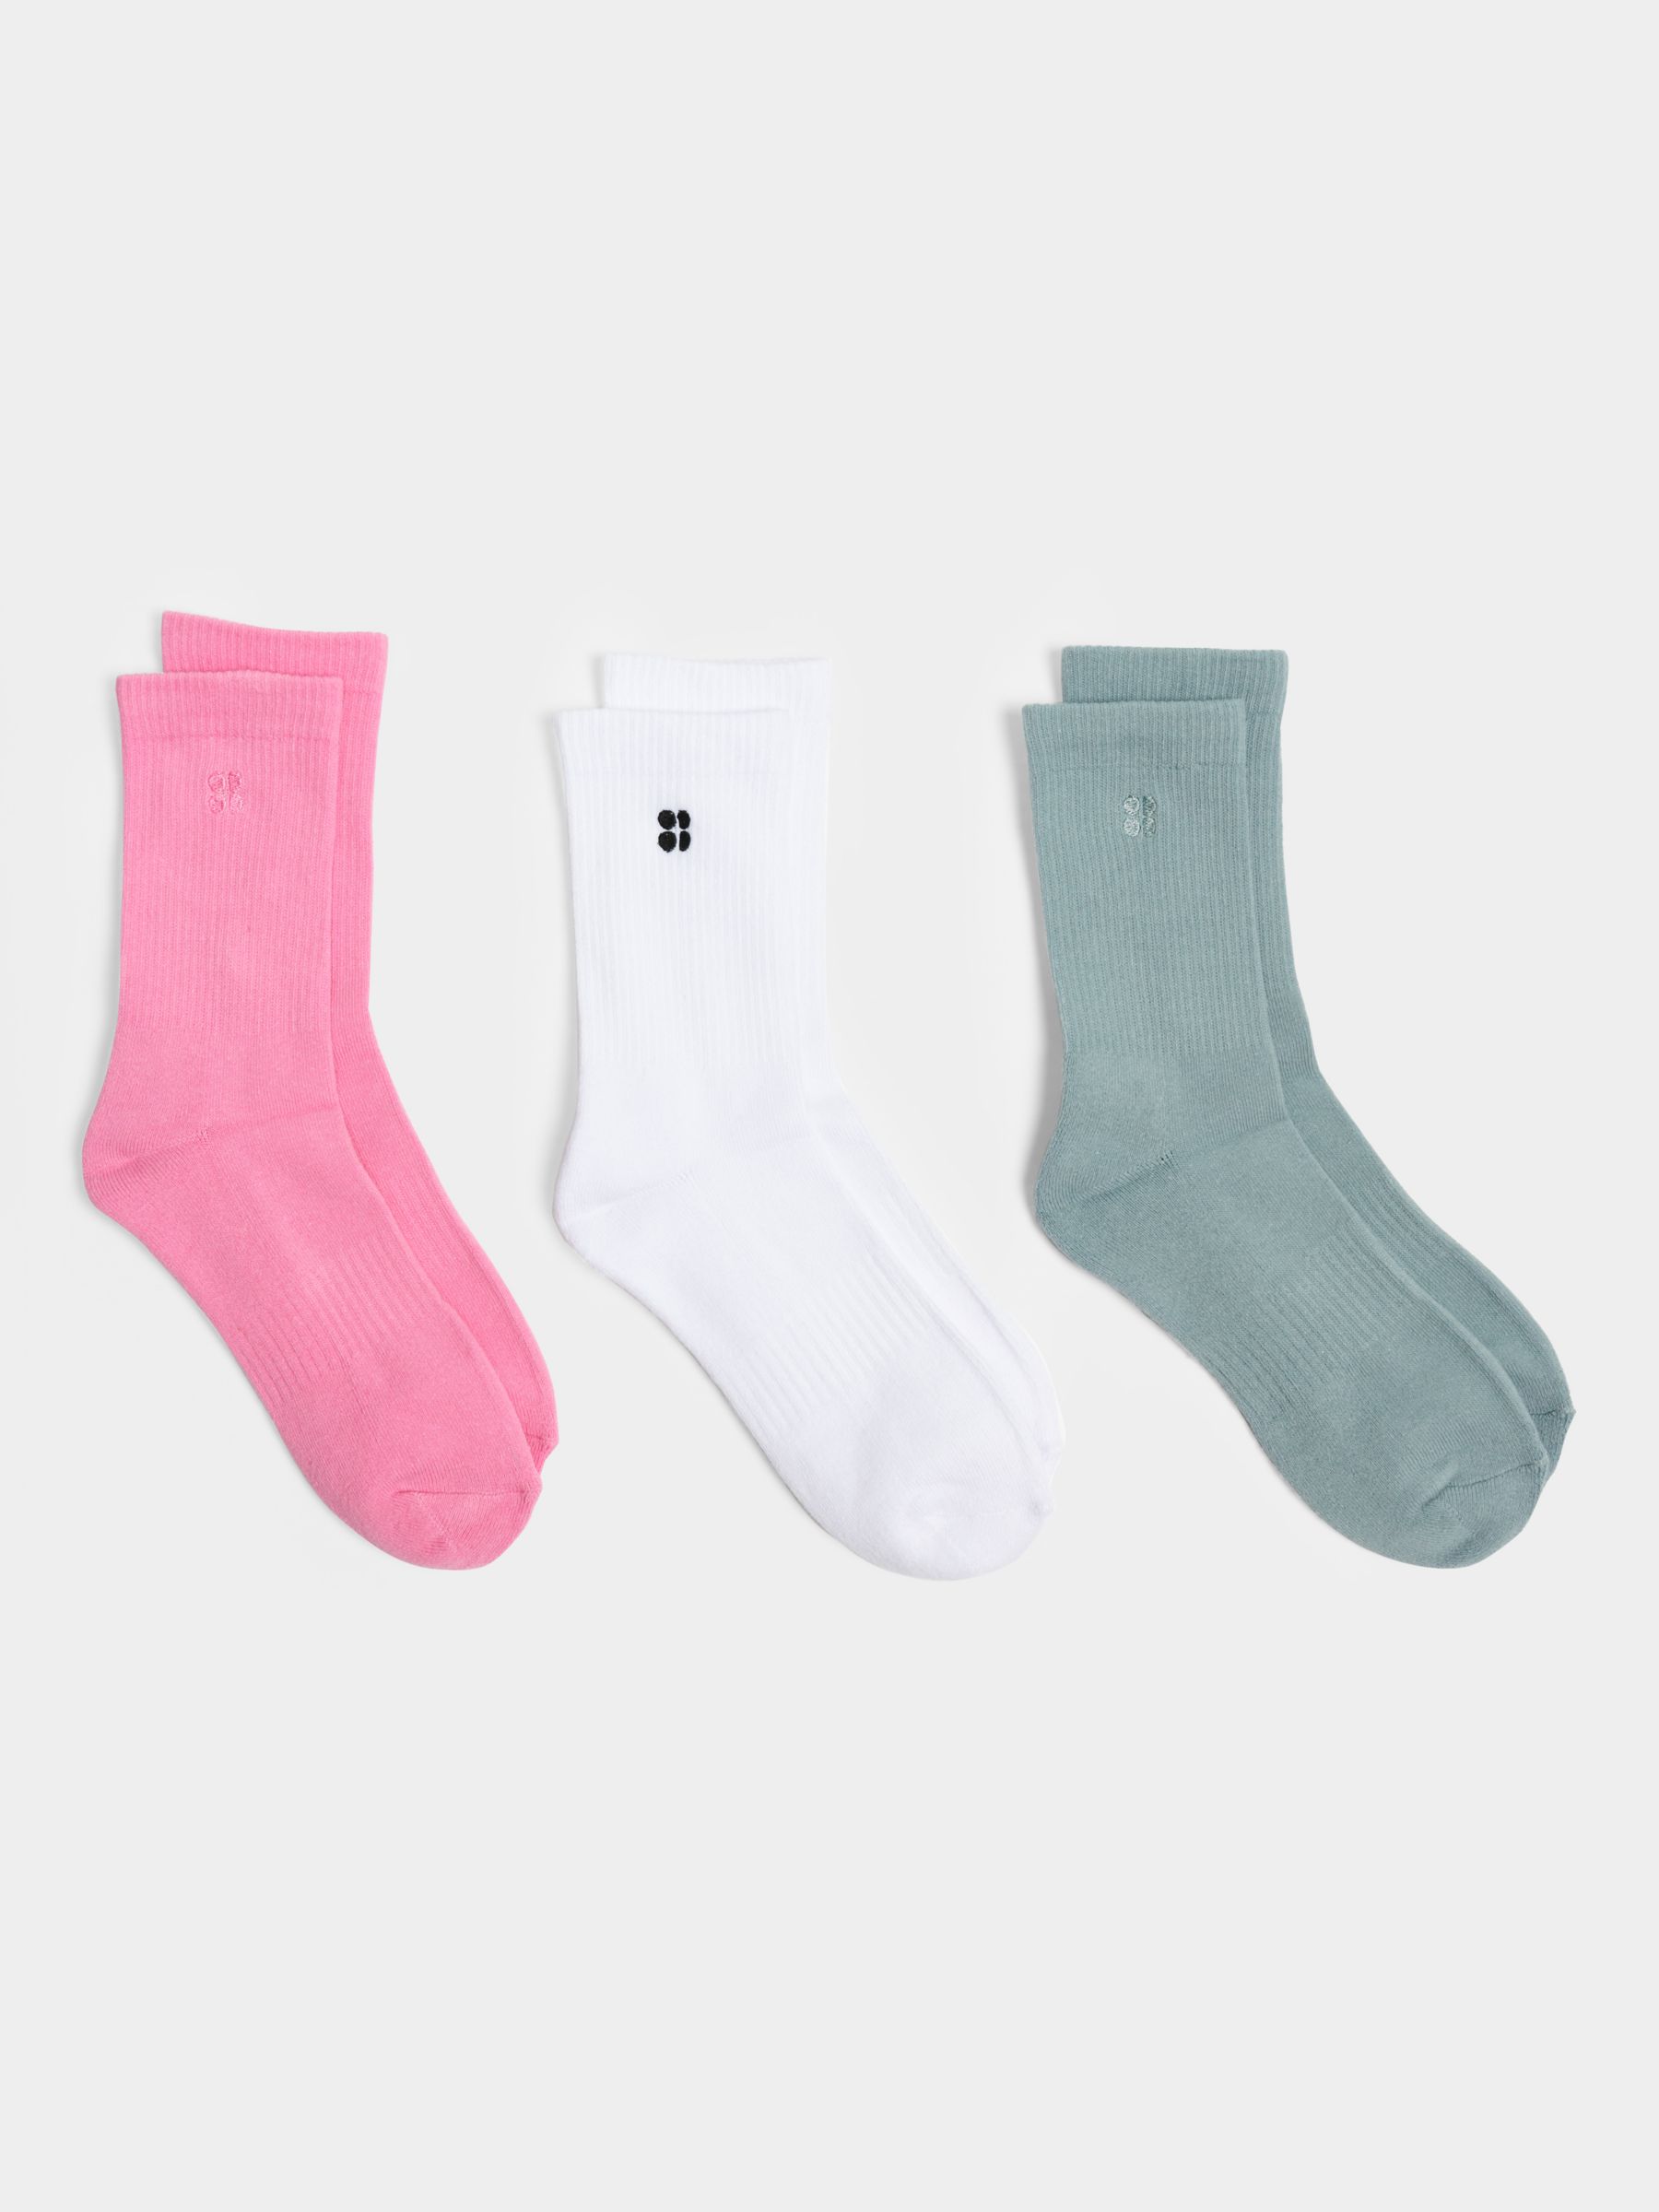 Sweaty Betty Organic Cotton Blend Essential Ankle Socks, Pack of 3 ...